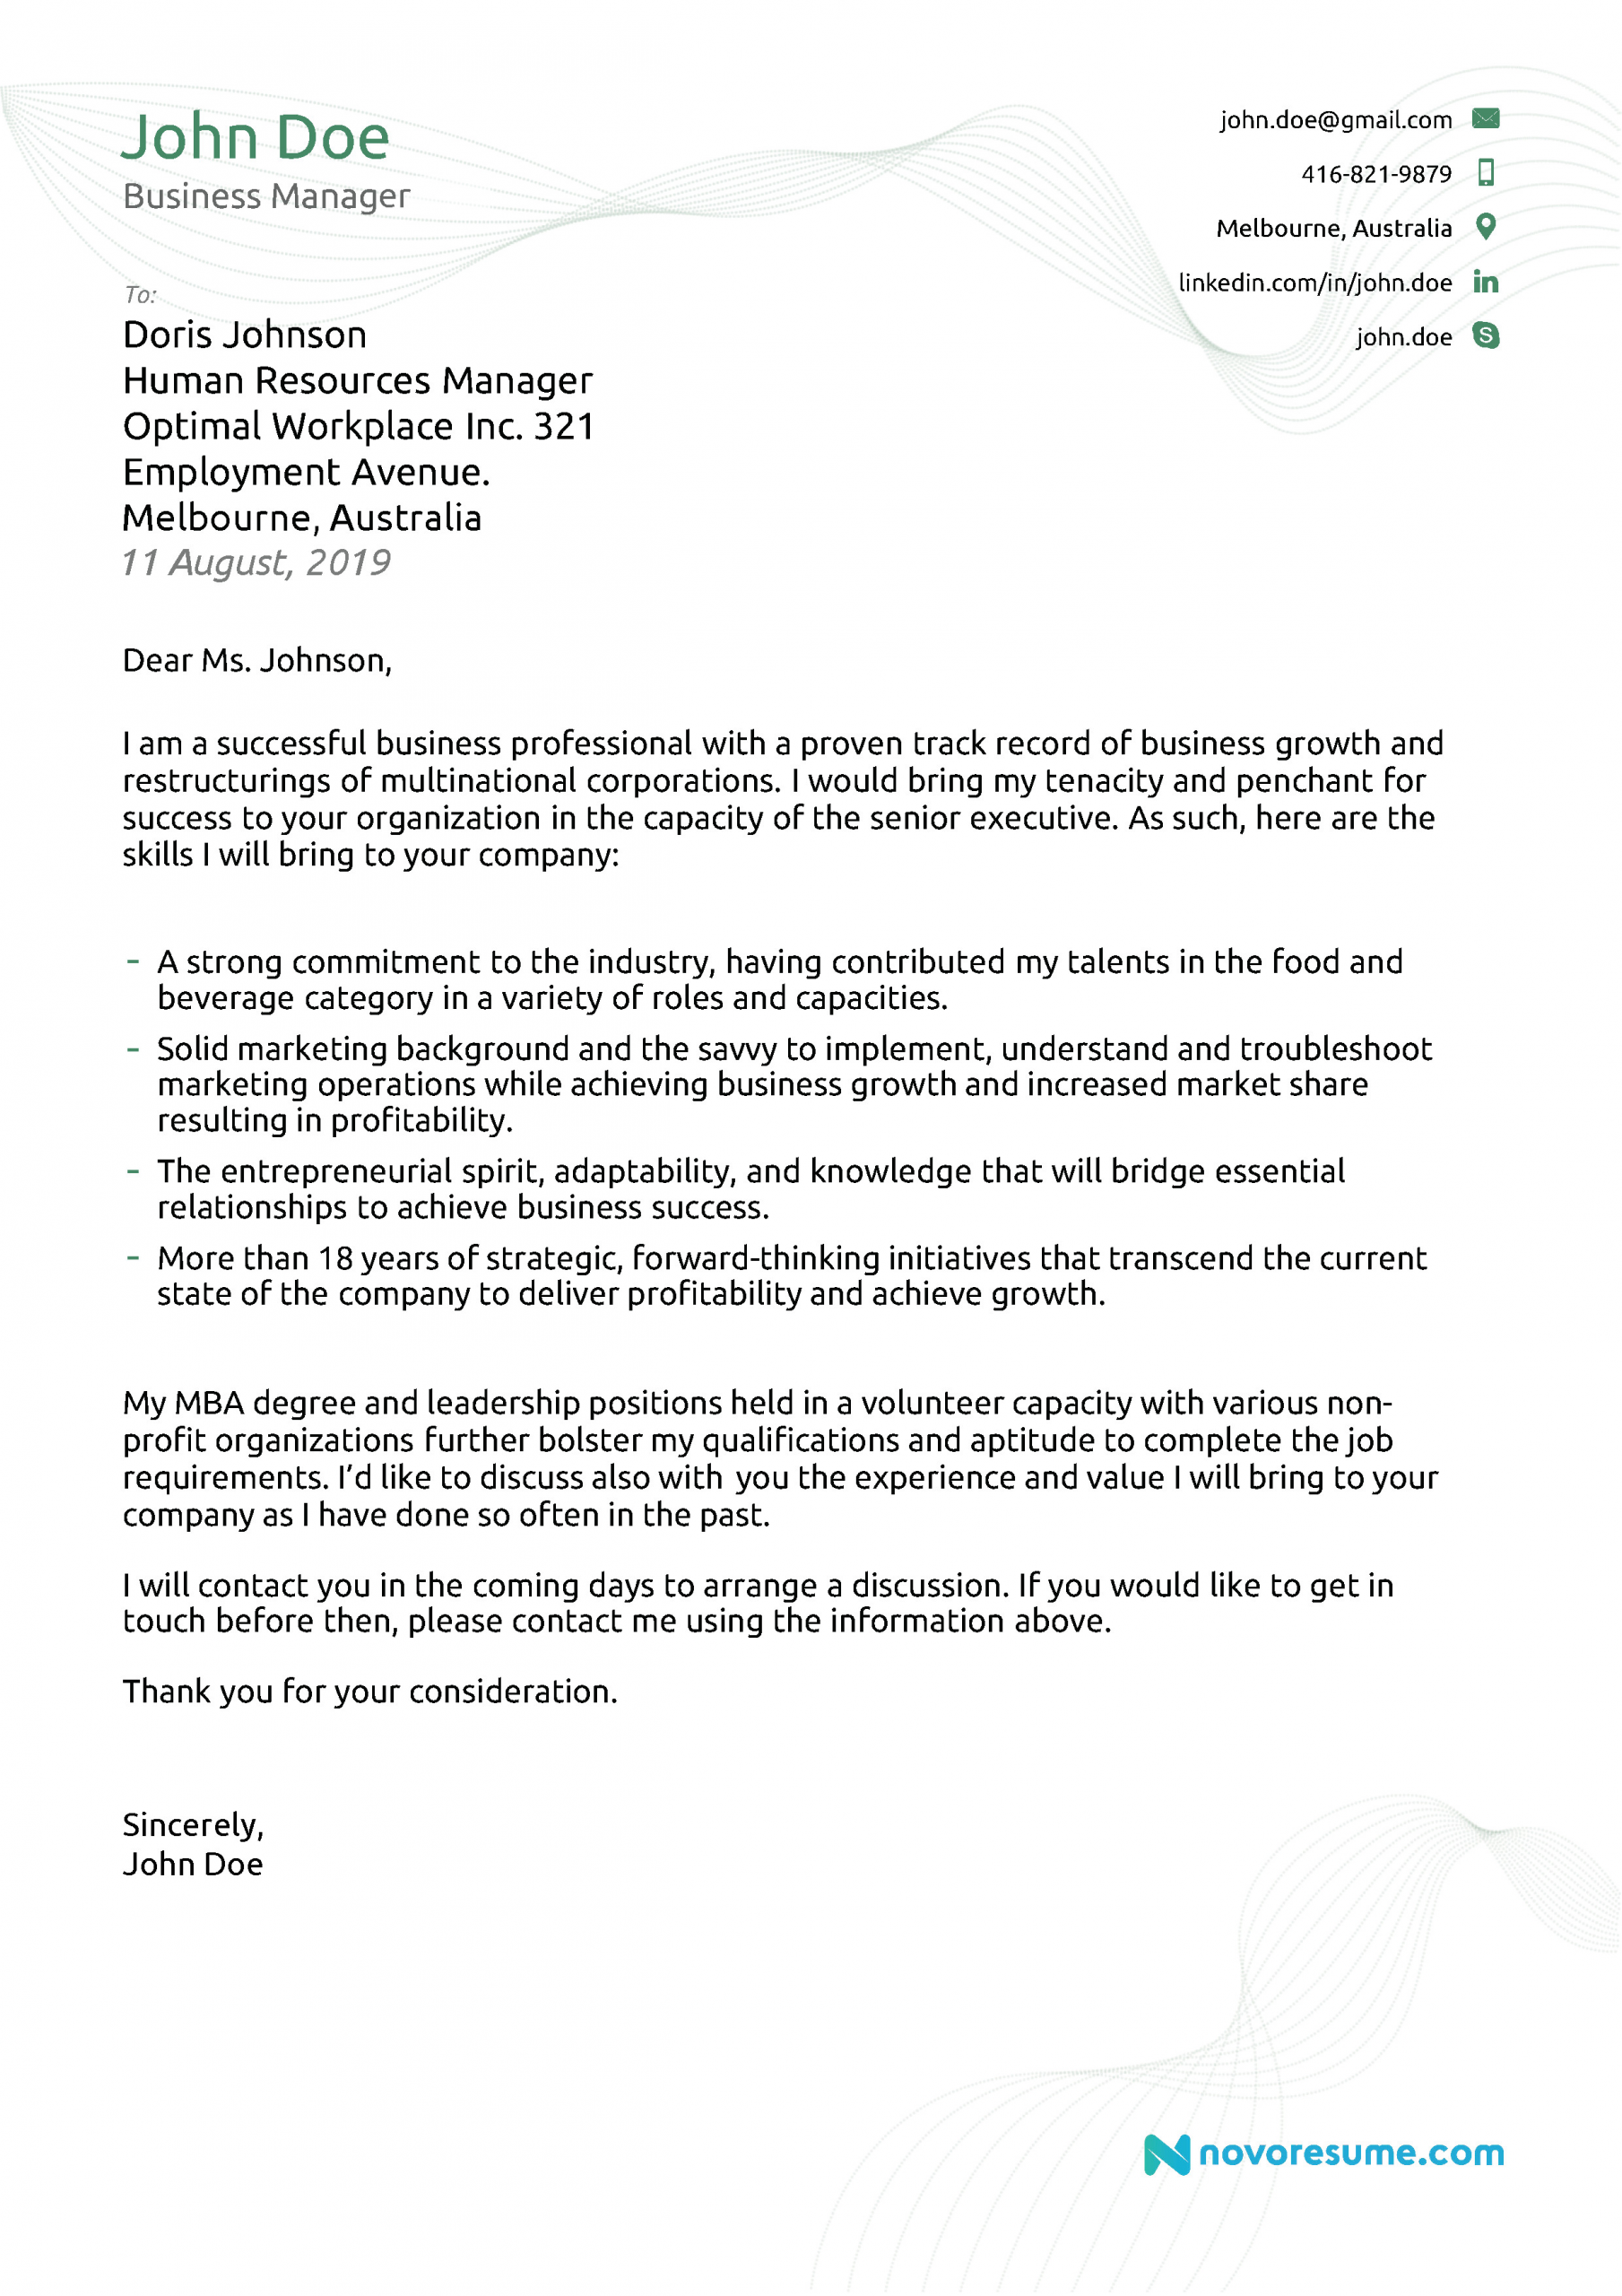 Business Cover Letter Template Business Management Cover Letter Examples Sample Cover